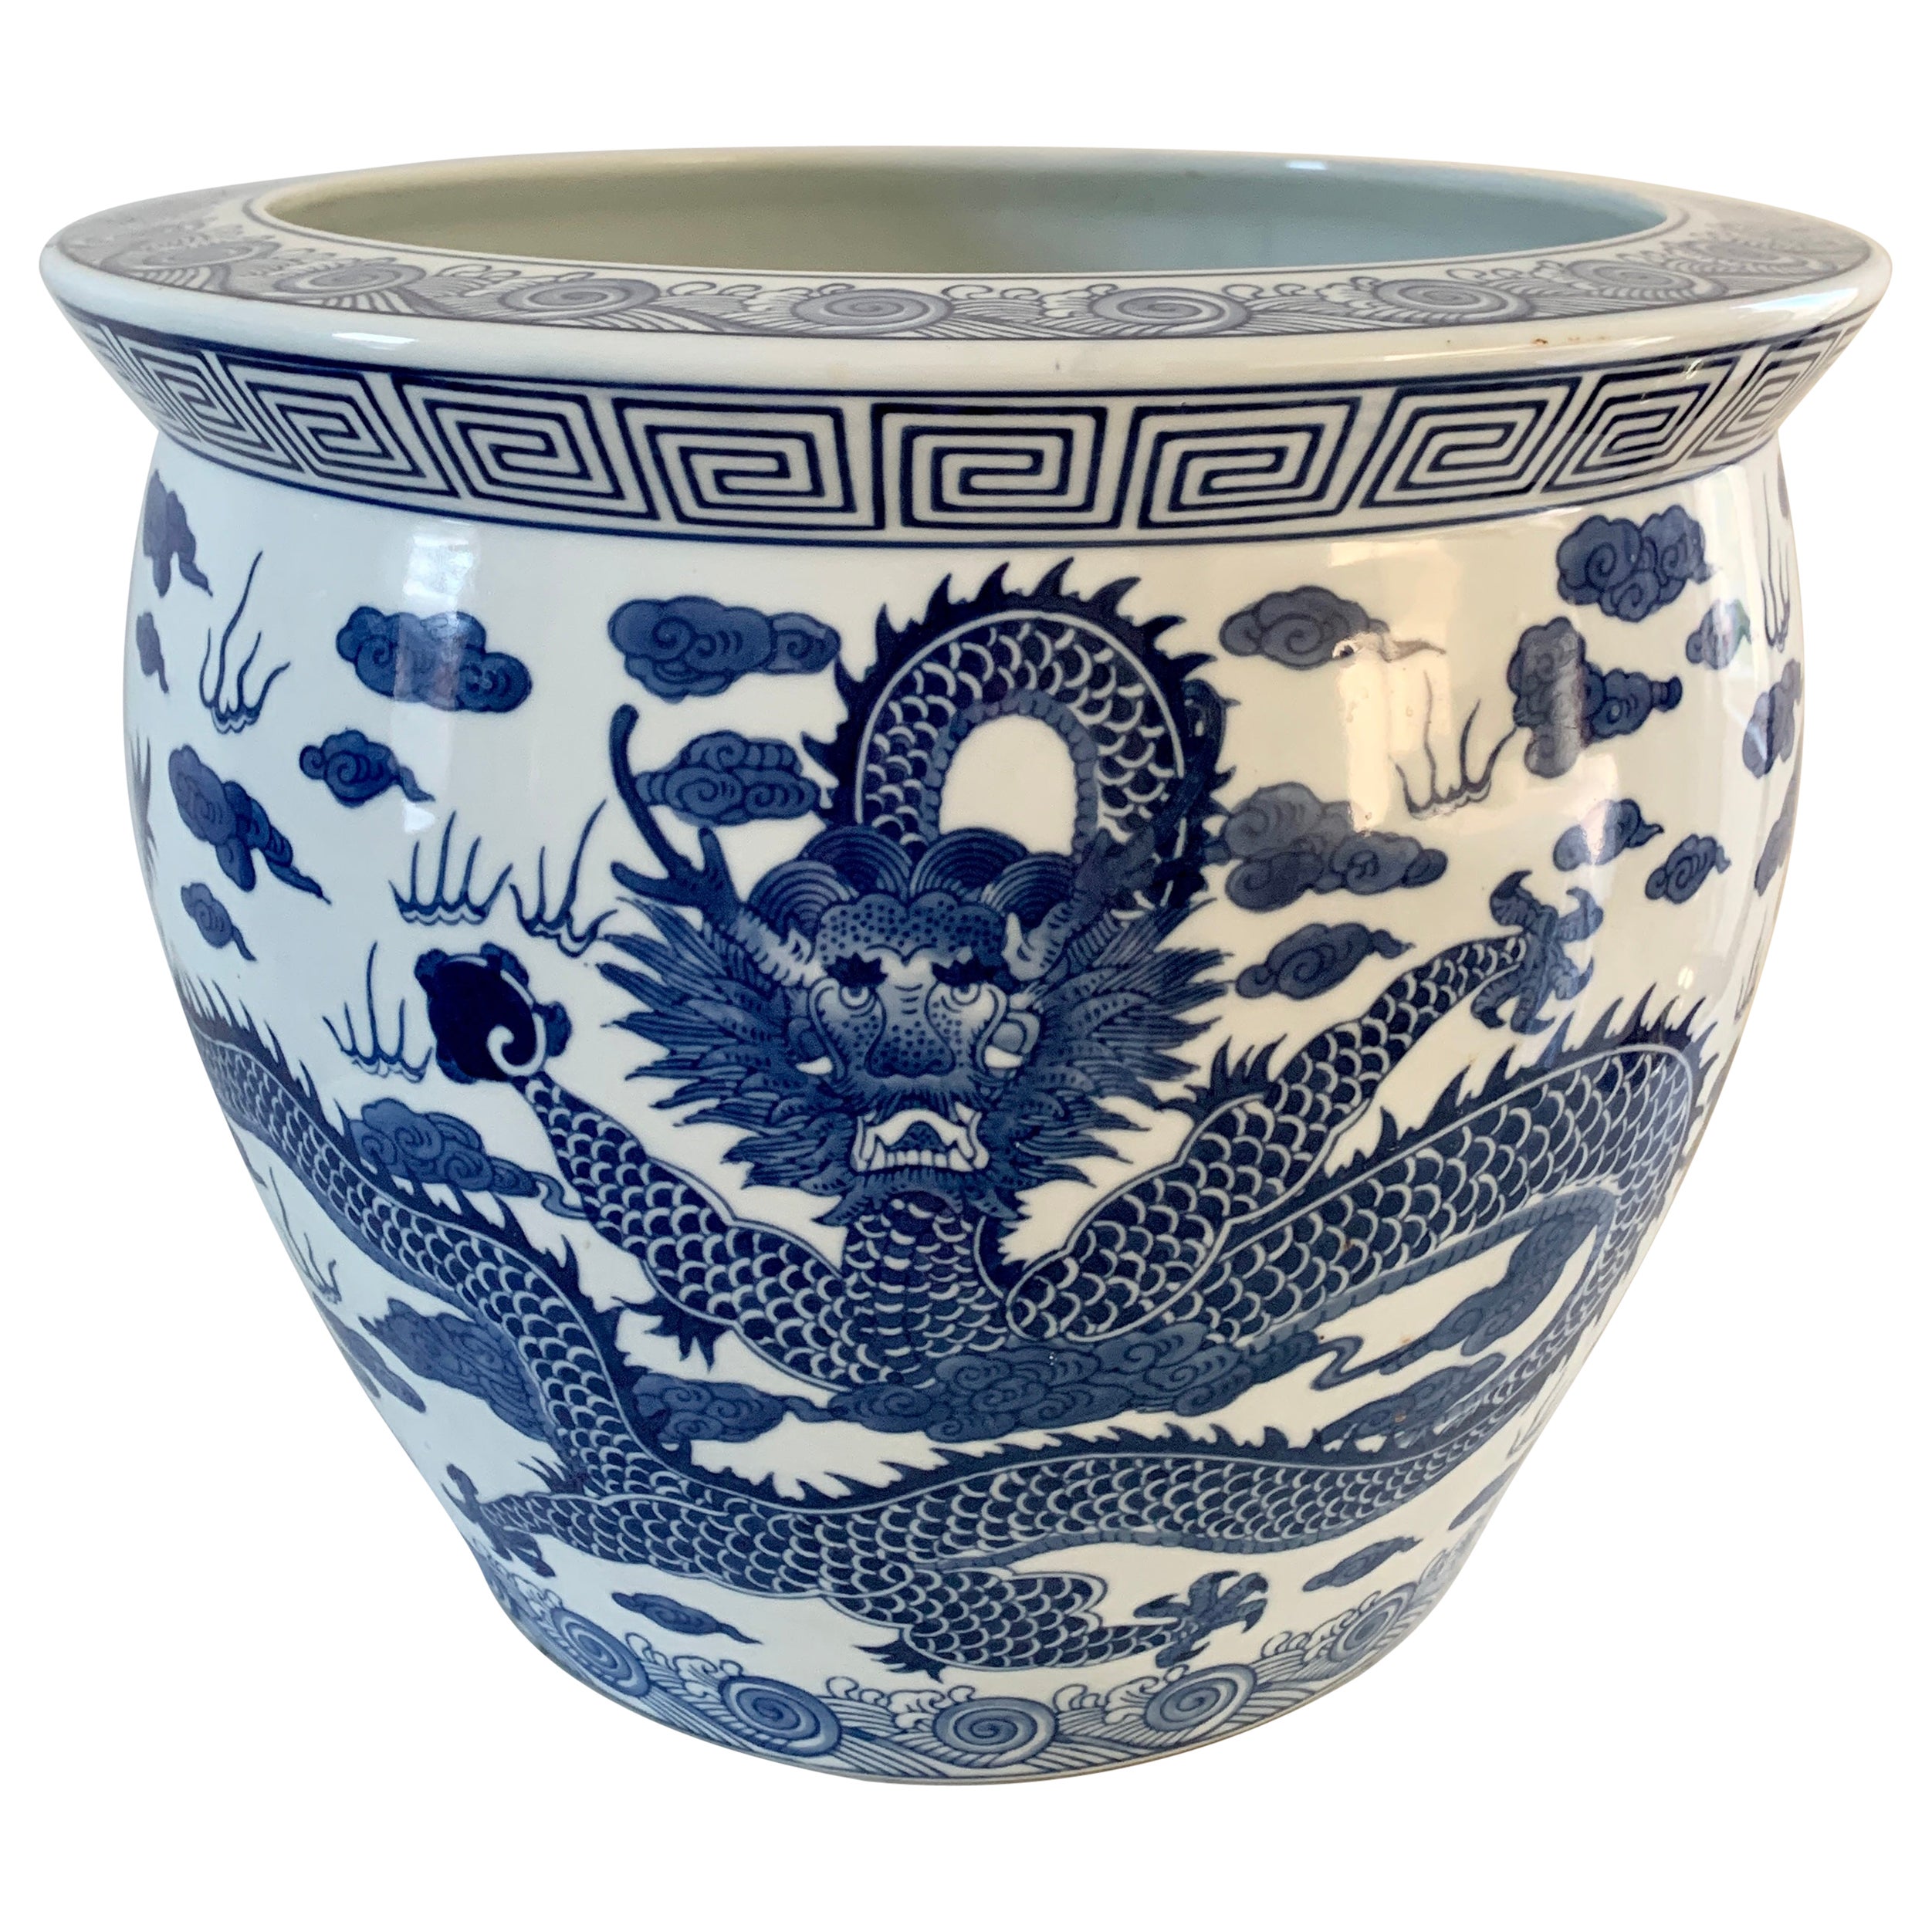 Chinoiserie Blue and White Dragon Porcelain Fishbowl Planter